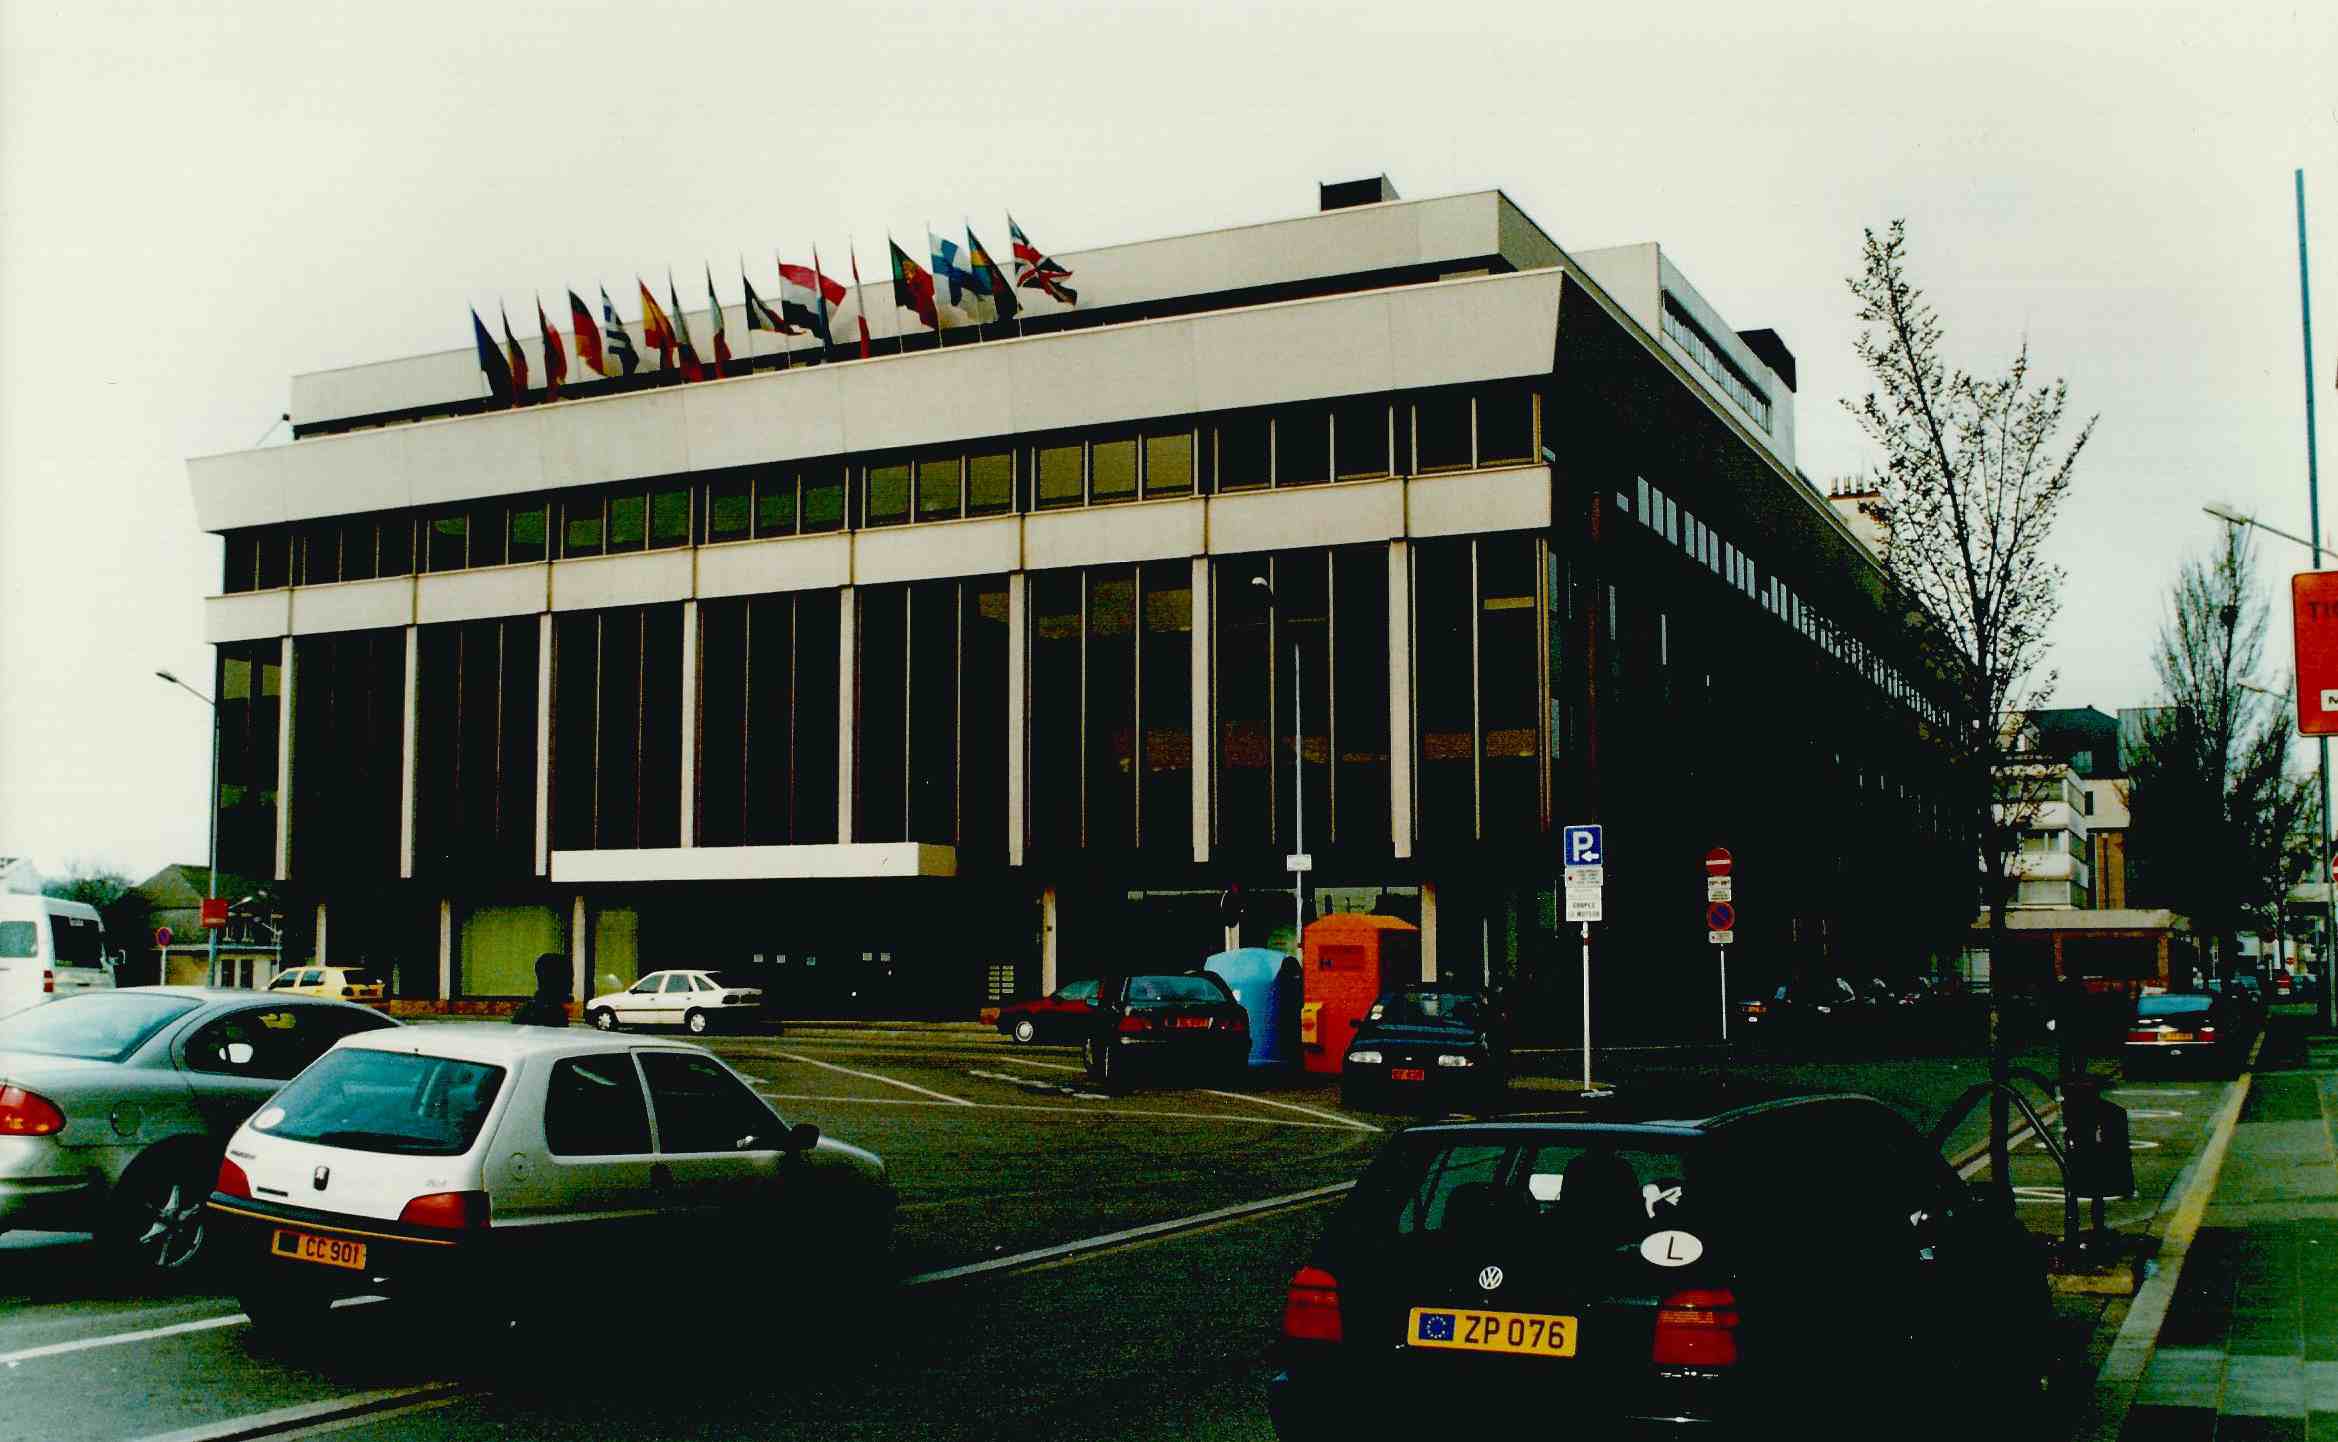 Luxemburg: publications office of the European Union